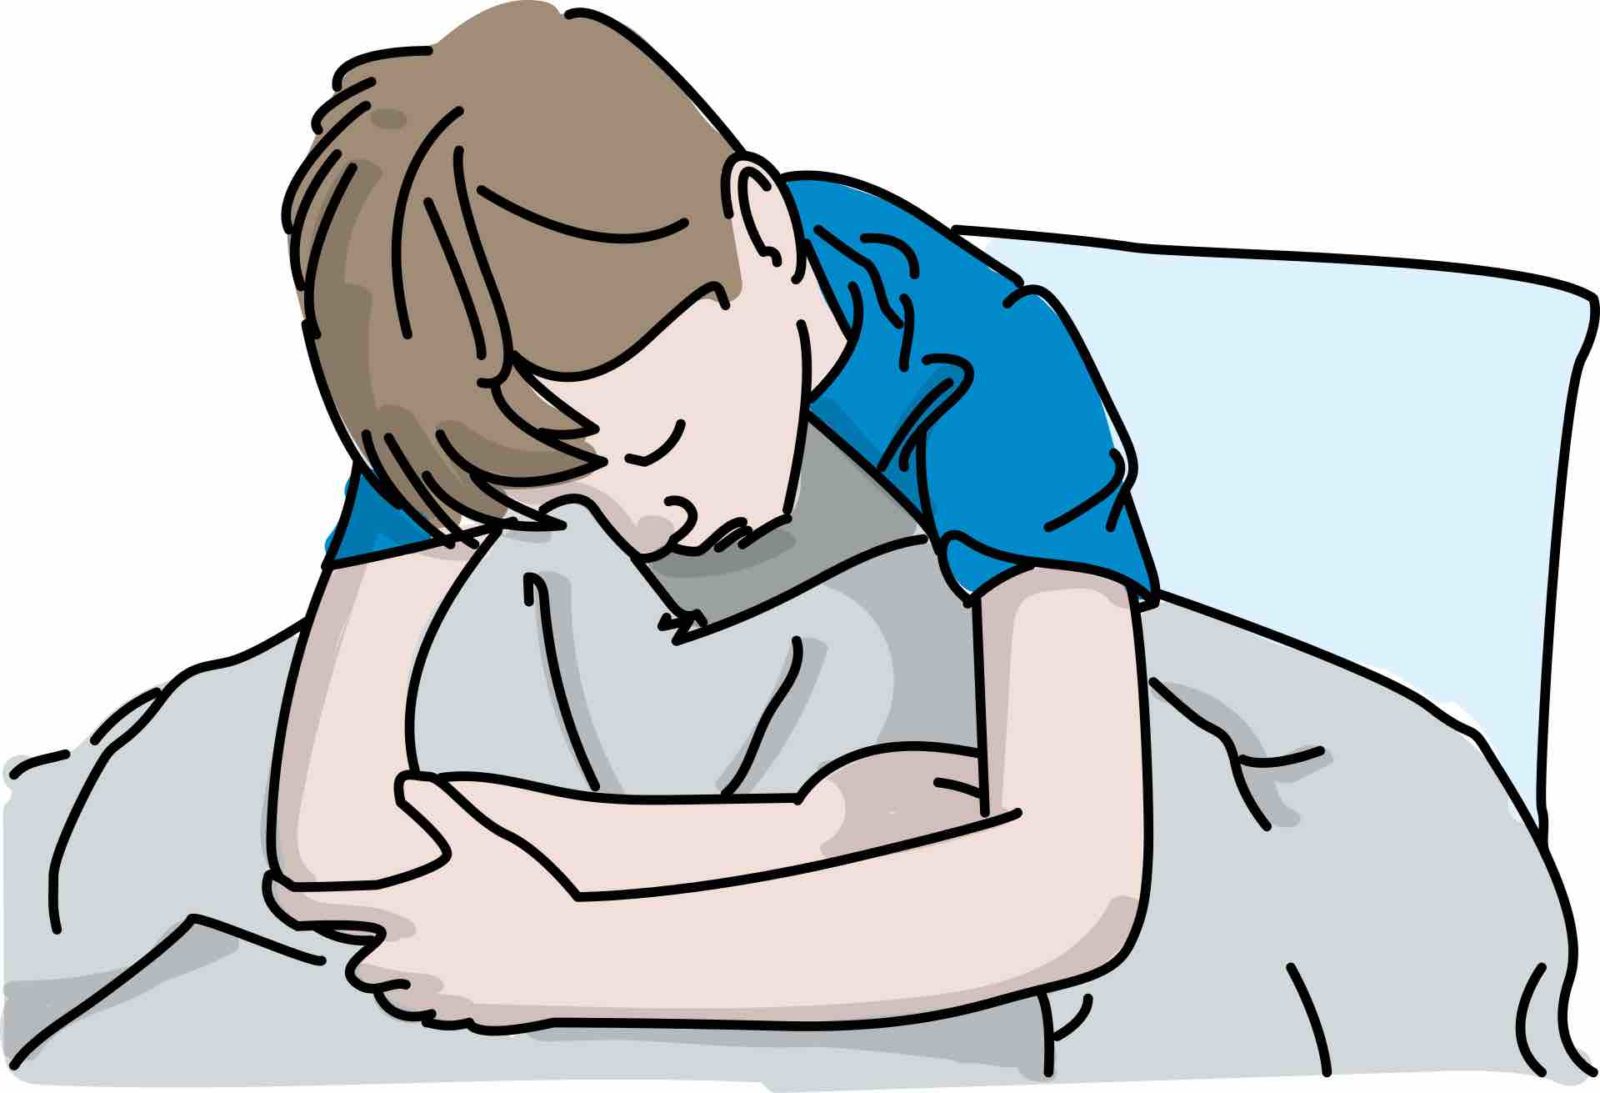 Illustration of a child with a bad cold in bed